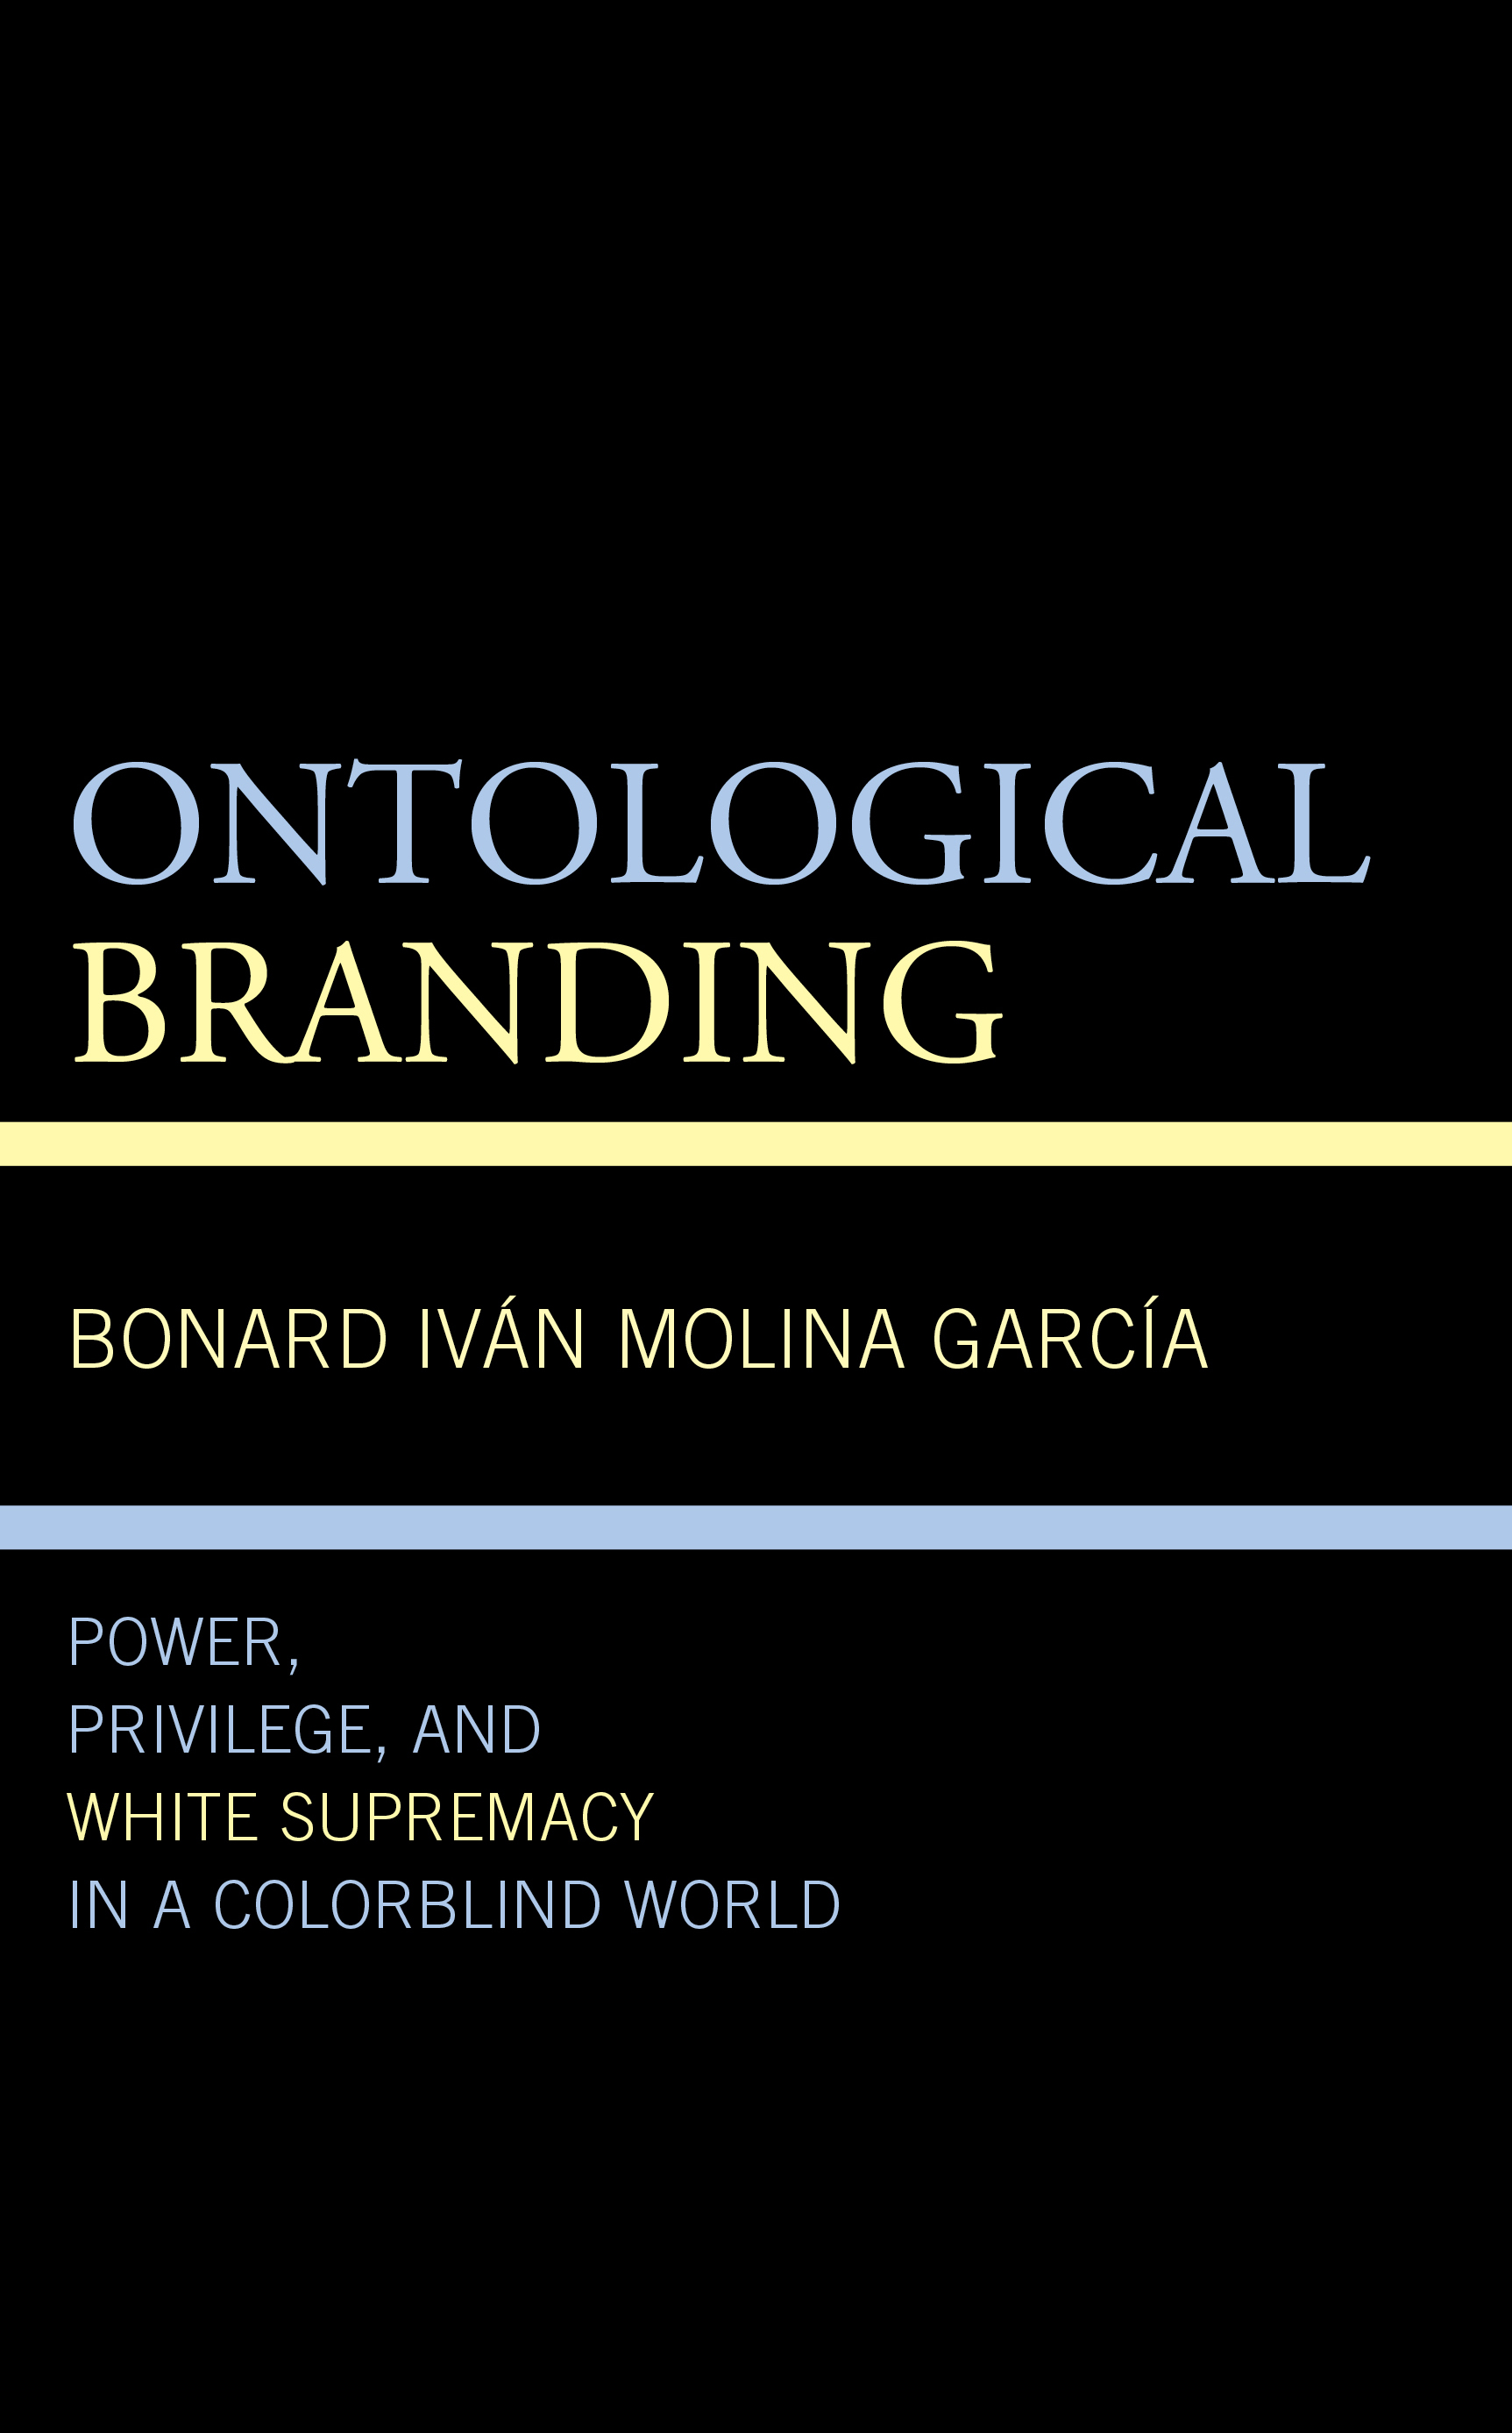 Ontological Branding: Power, Privilege, and White Supremacy in a Colorblind World